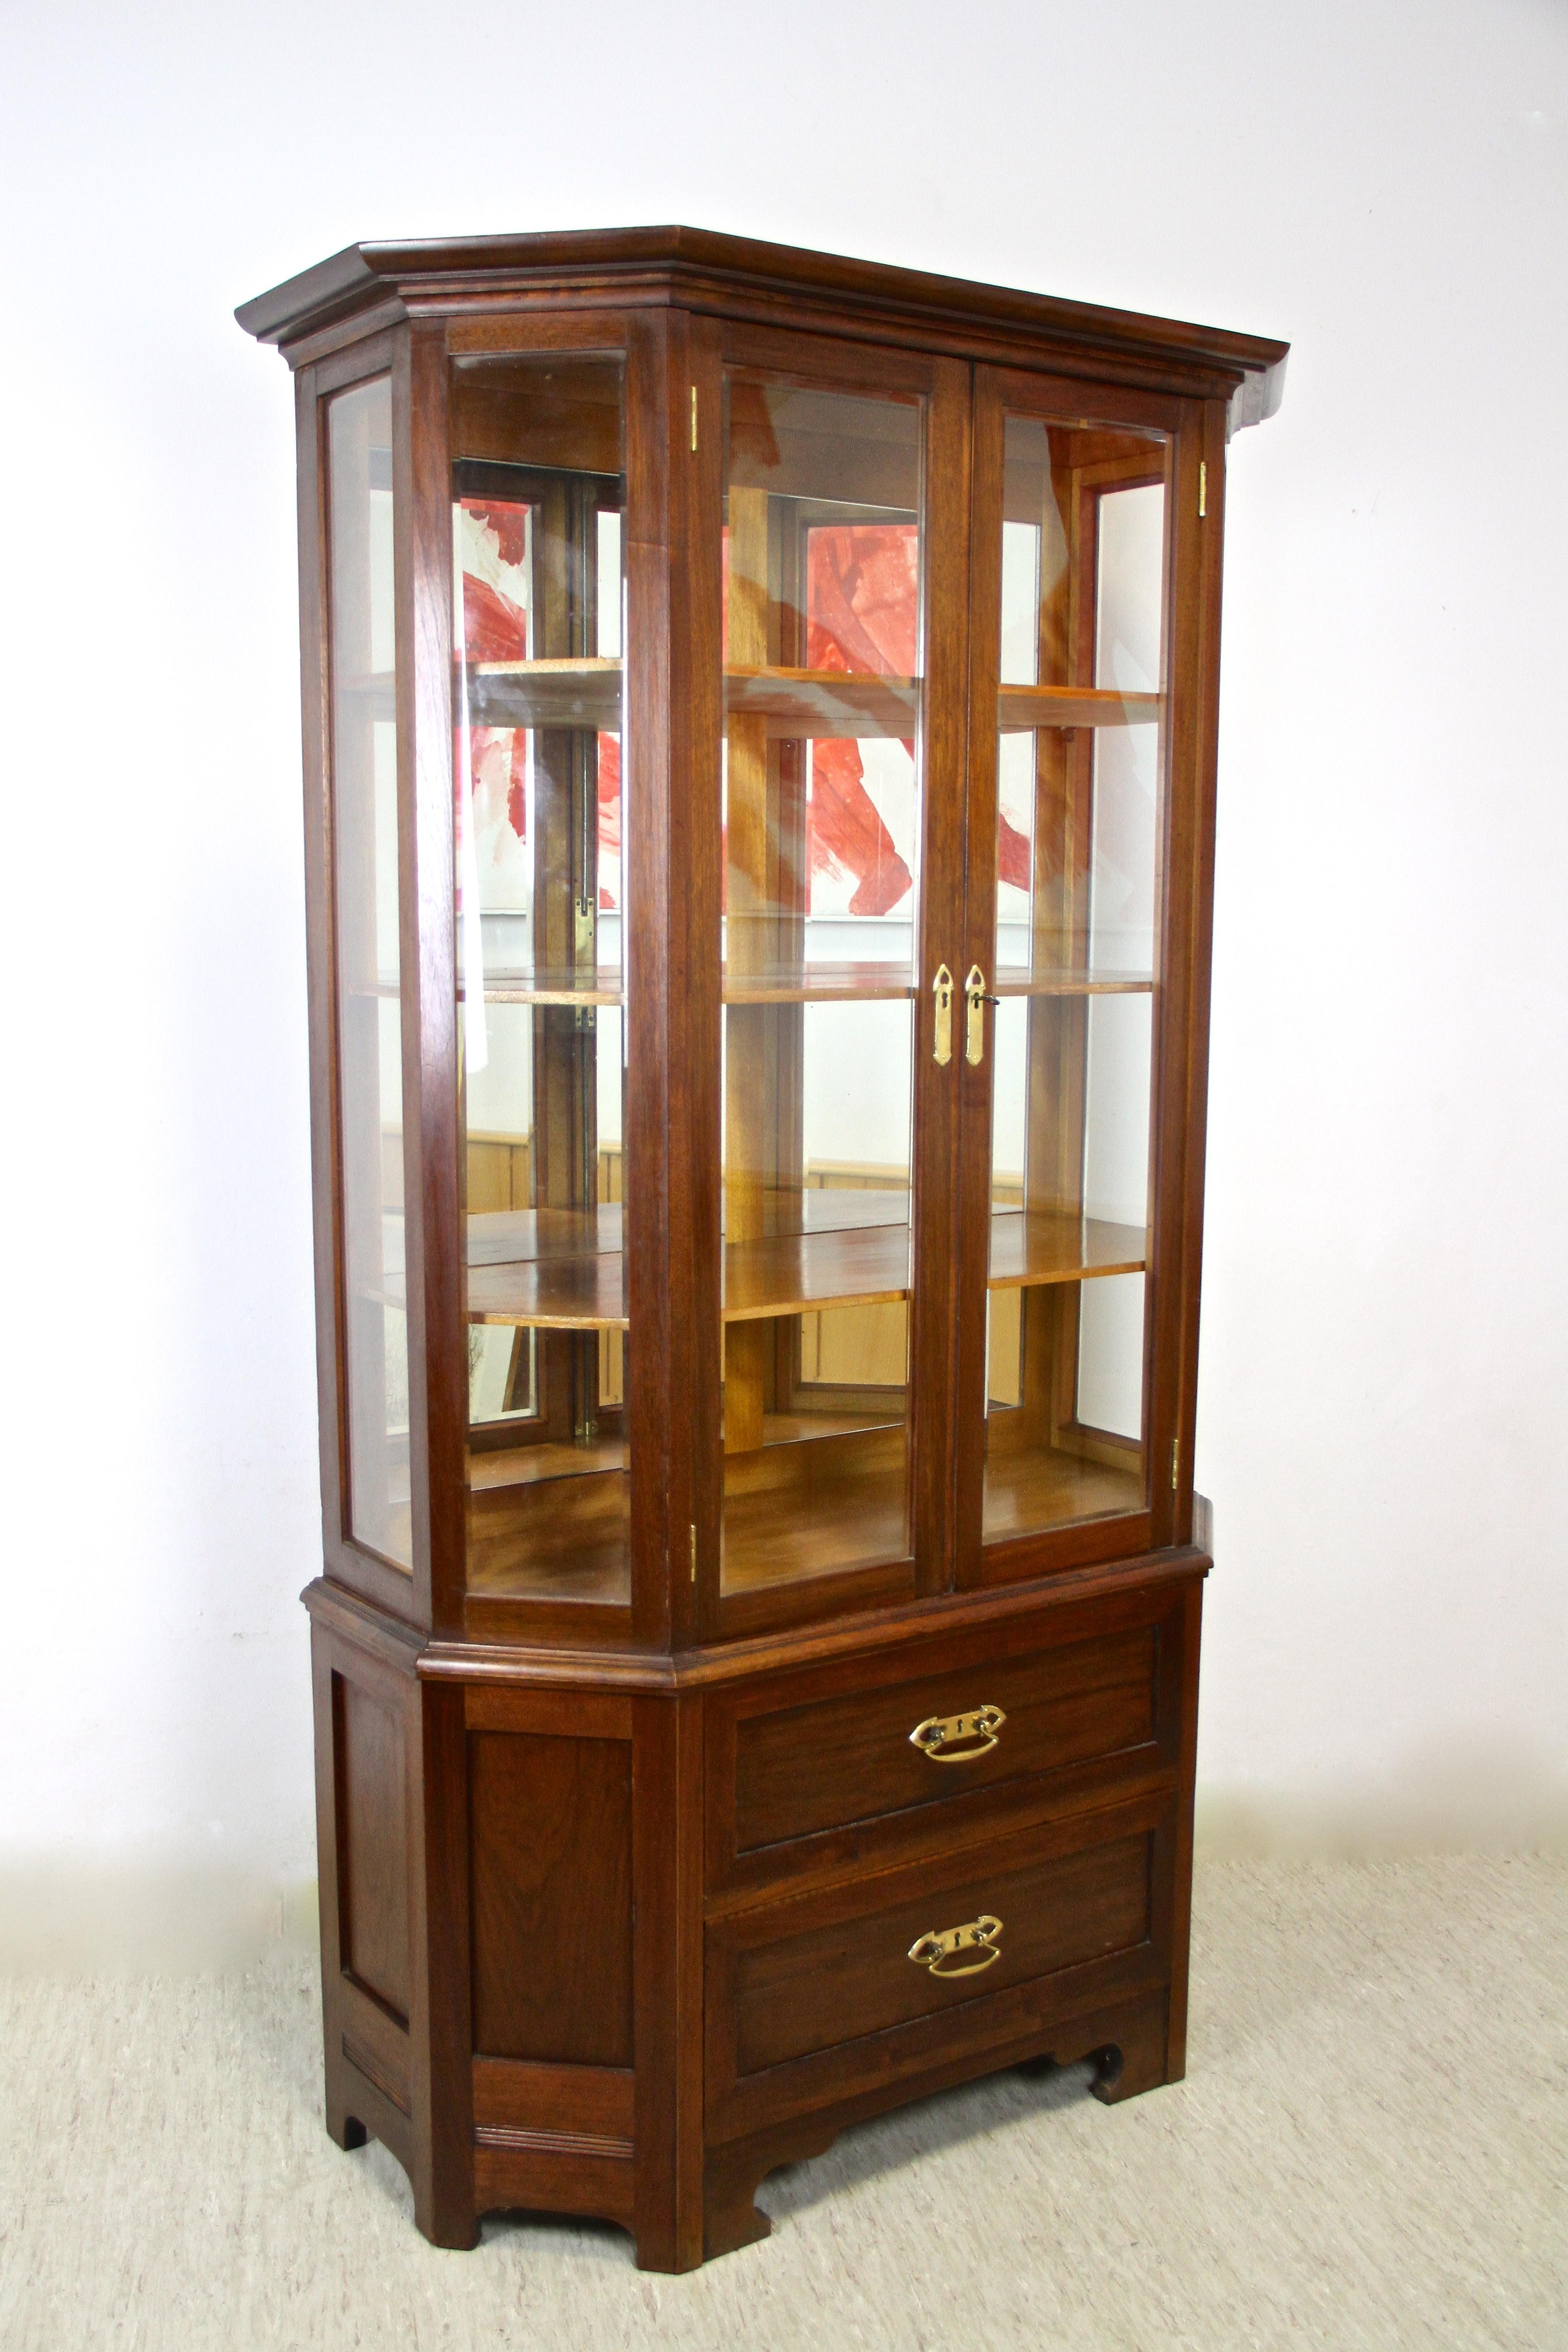 Fantastic Mahogany Vitrine Cabinet from the early 20th century with the still original faceted glass panels. An absolute beautiful designed Art Nouveau Vitrine elaborately made in Austria around 1910 with two doors that can be wide opened, offering